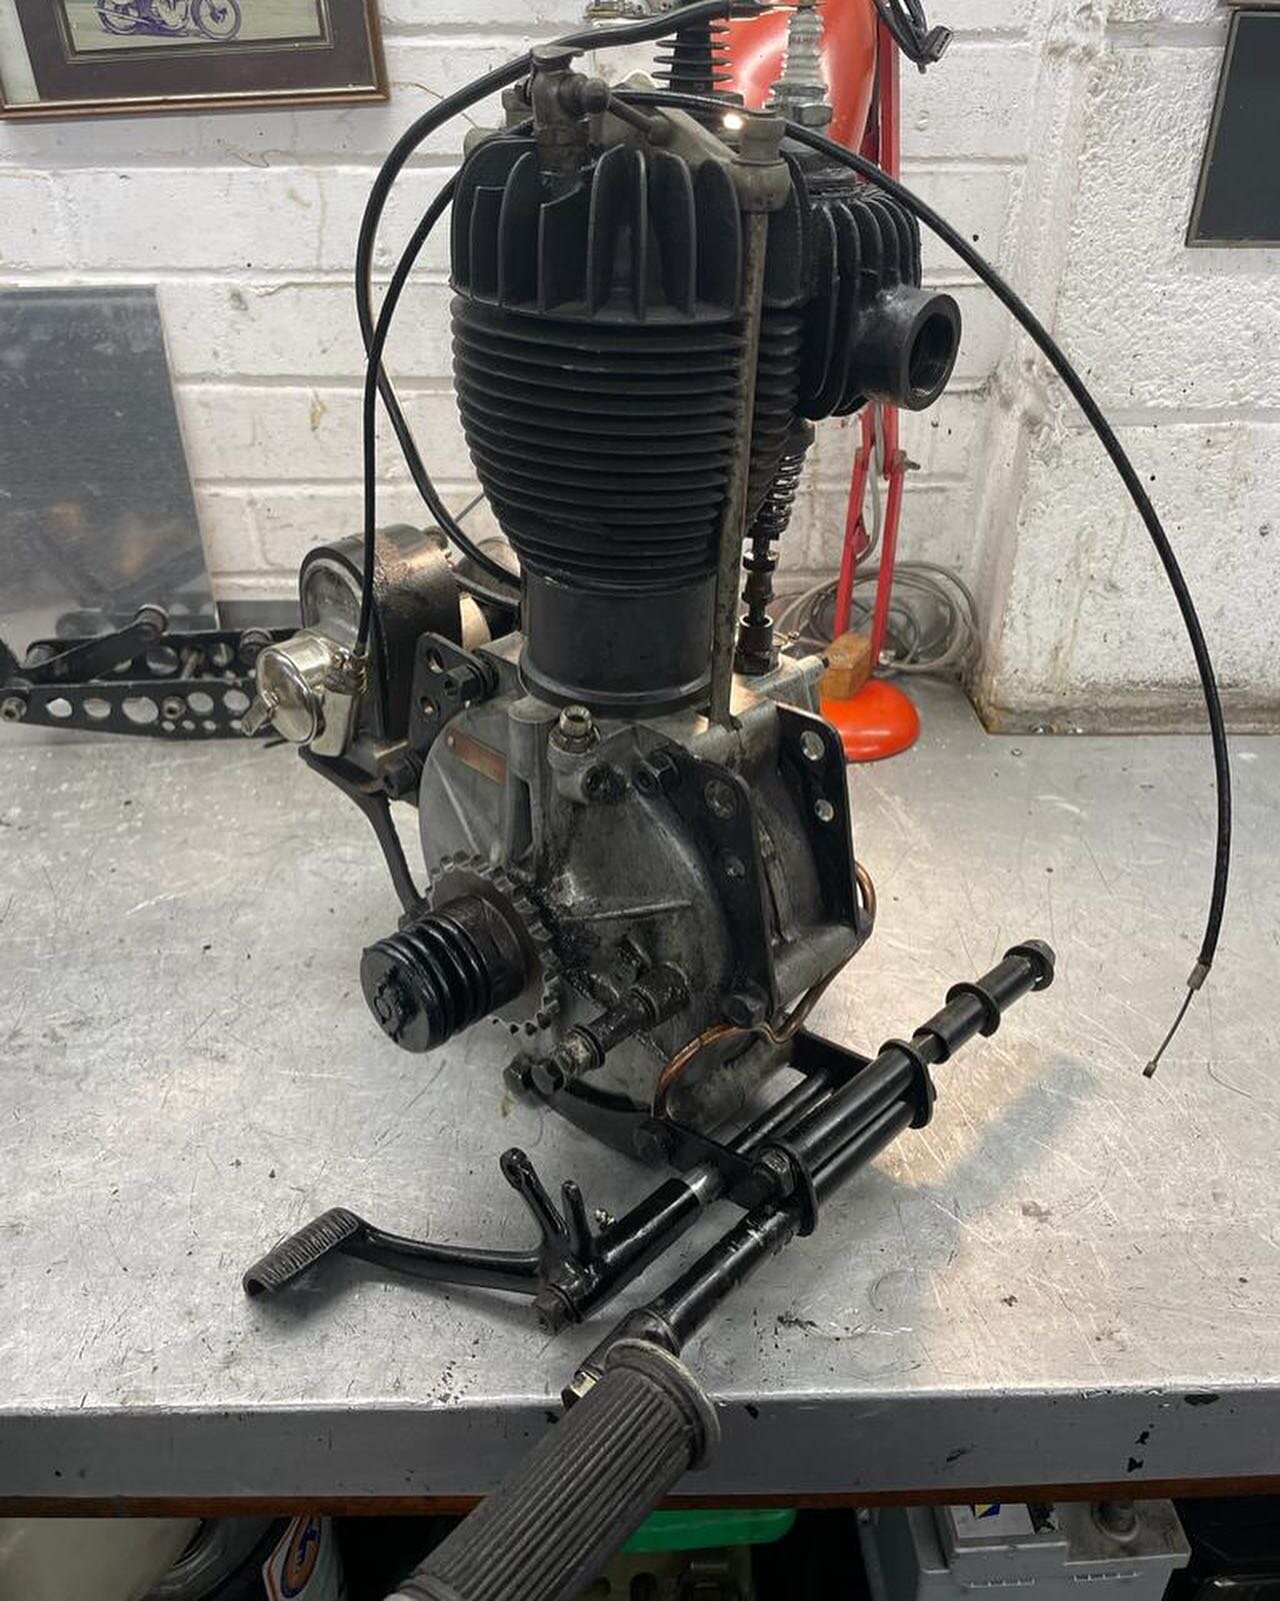 We suspect a big end issue with this 1927 AJS H4 engine, more details to follow&hellip;. #vintagemotorcycles #vintageajs #ajsh4 #flattankers #bigendbother #wolverhamotonsfinest